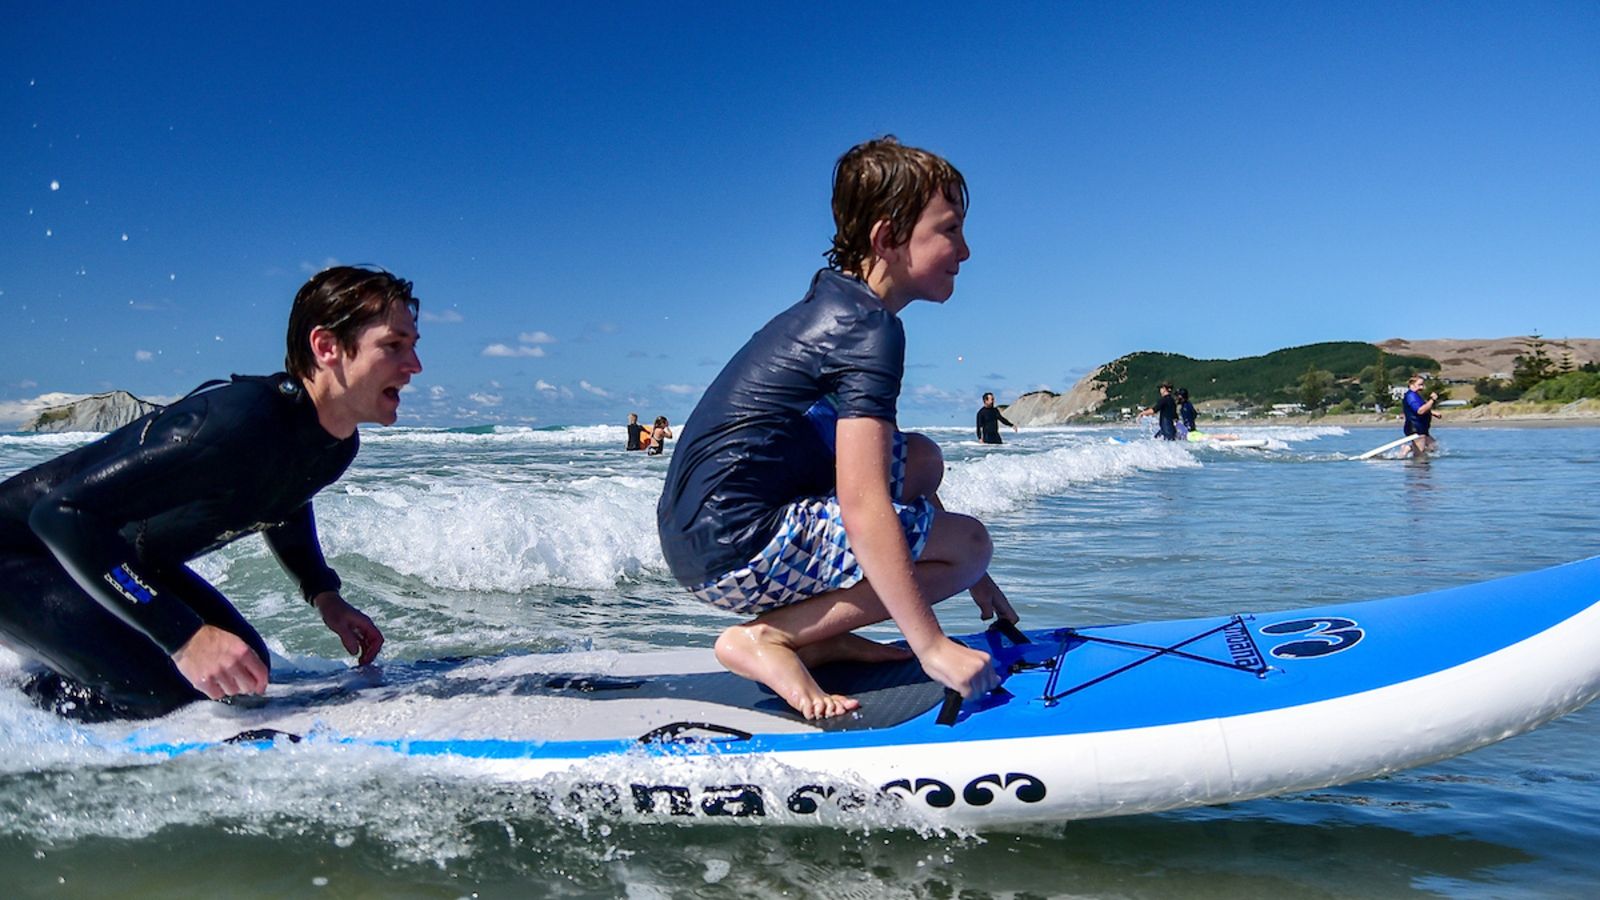 Two young boys on a paddleboard in the surf. They are mid action catching a wave. The younger one is wearing a rash vest and board shorts and the older one is wearing a wetsuit. 